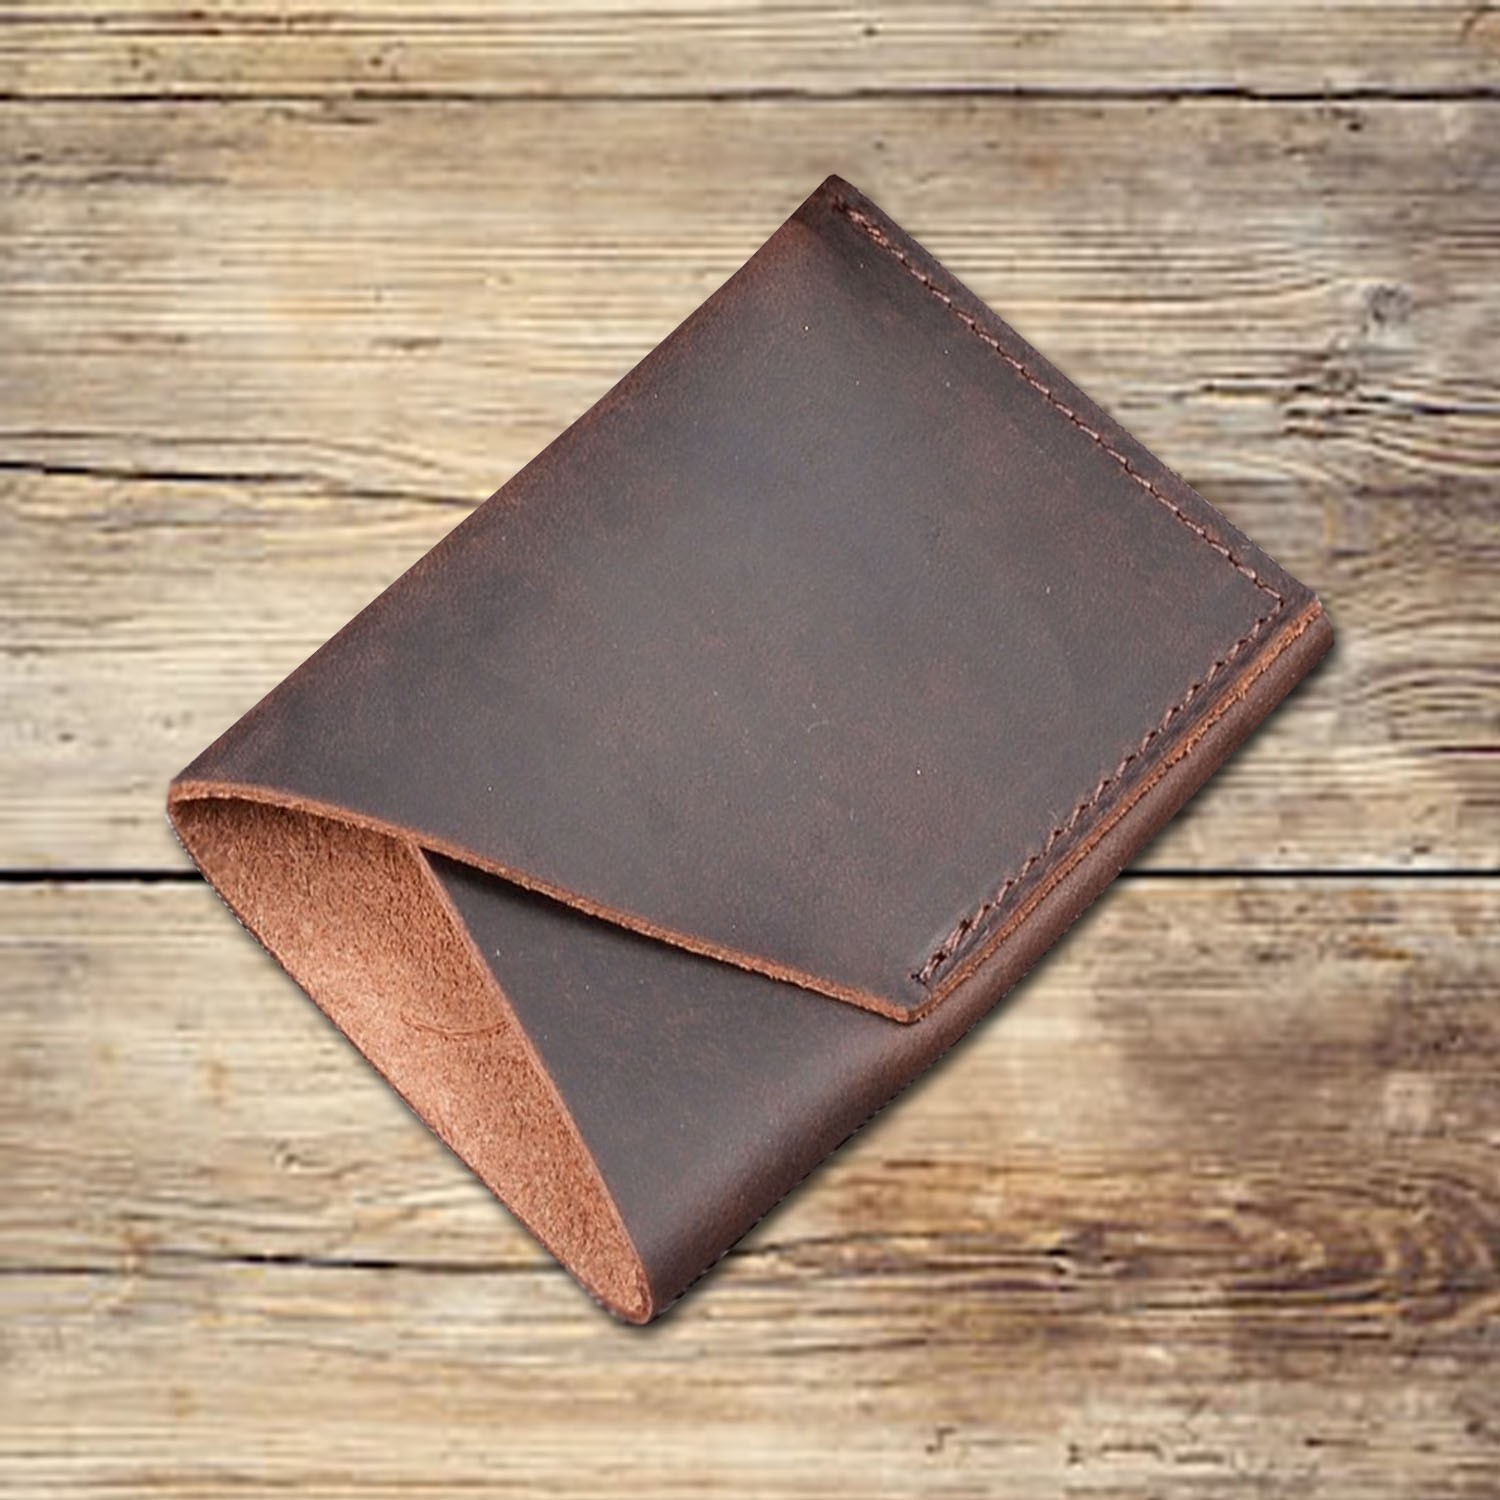 2 slots folded brown leather card wallet